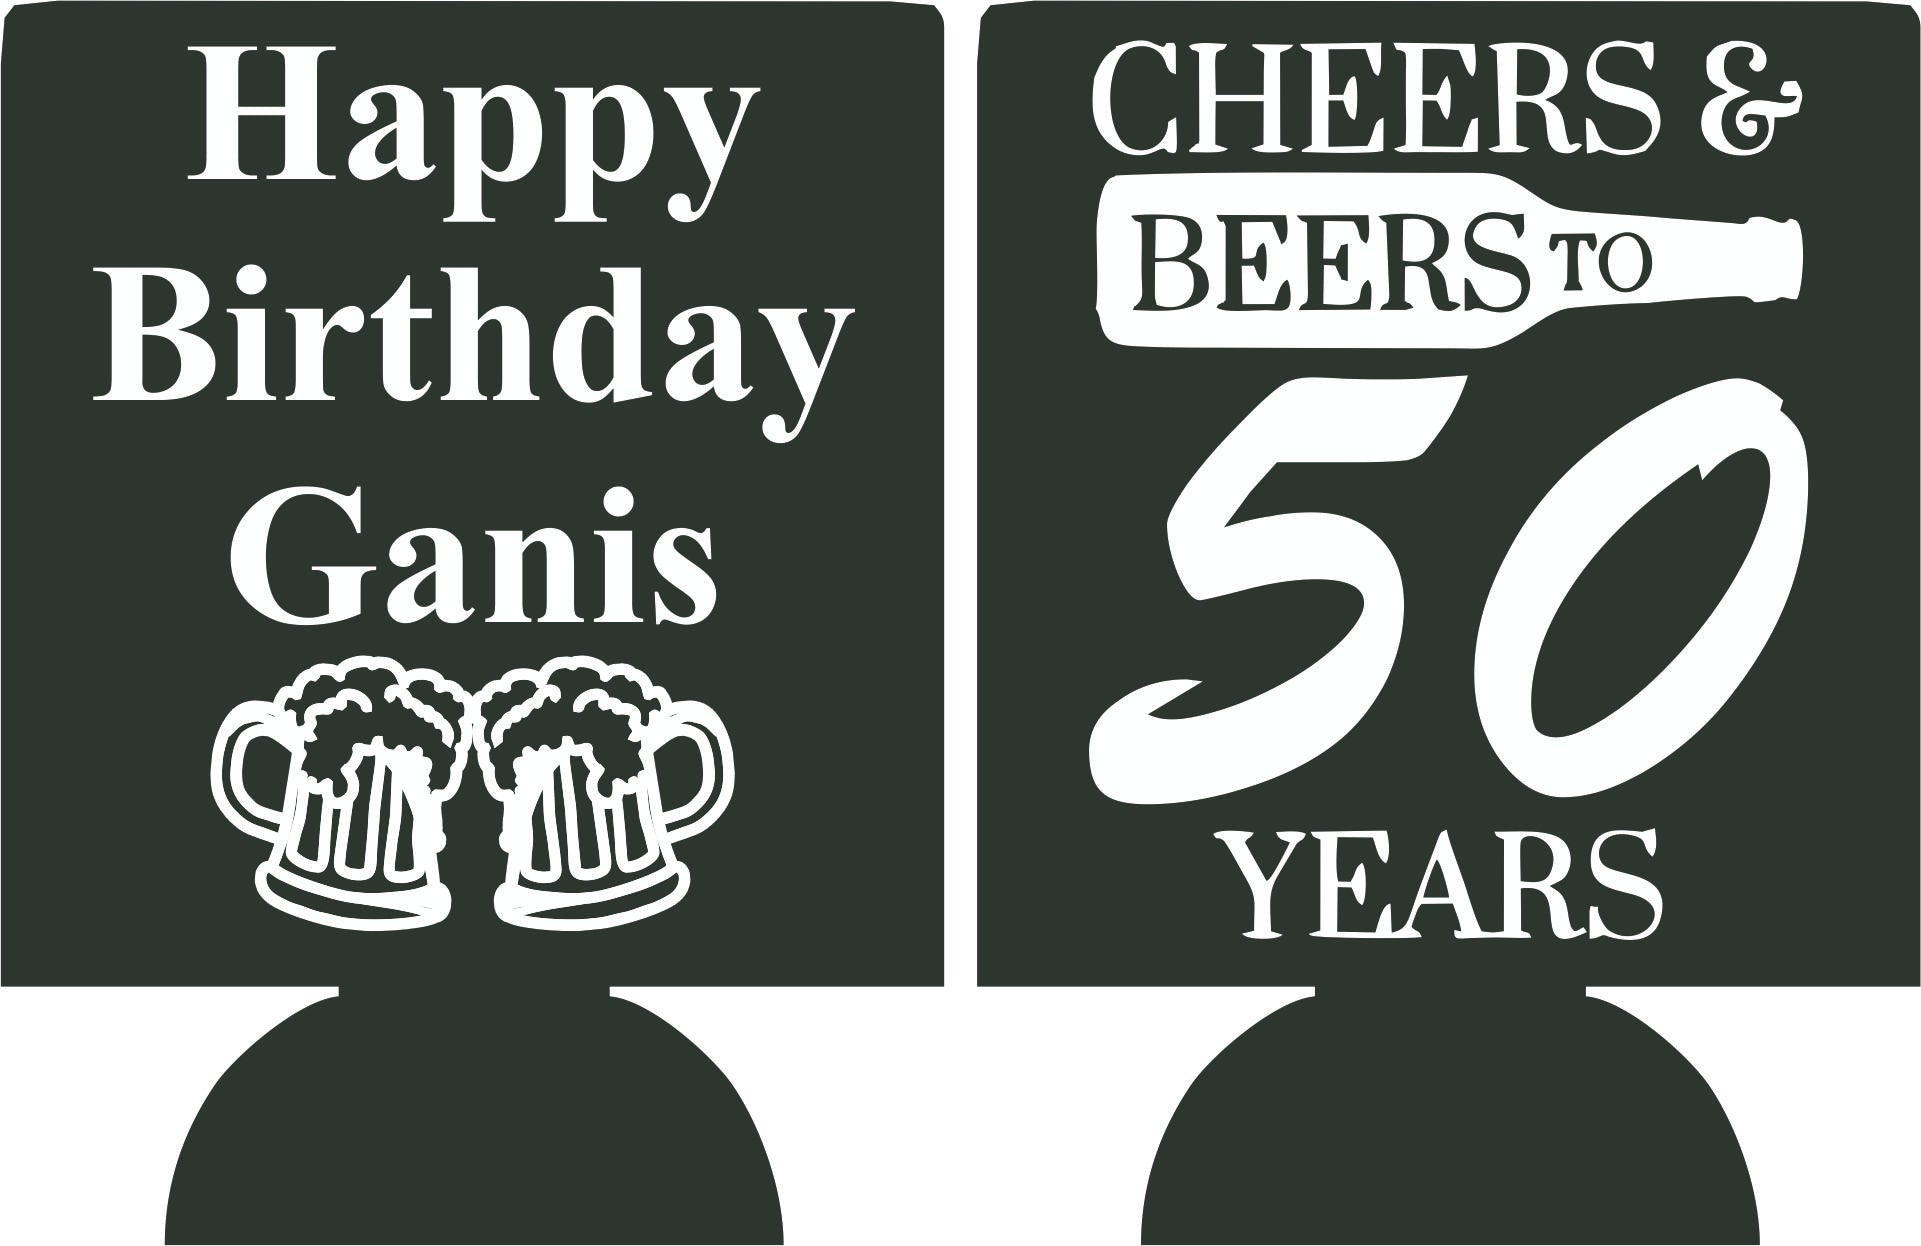 Download Cheers and Beers to 50 years Birthday koozie can coolies ...